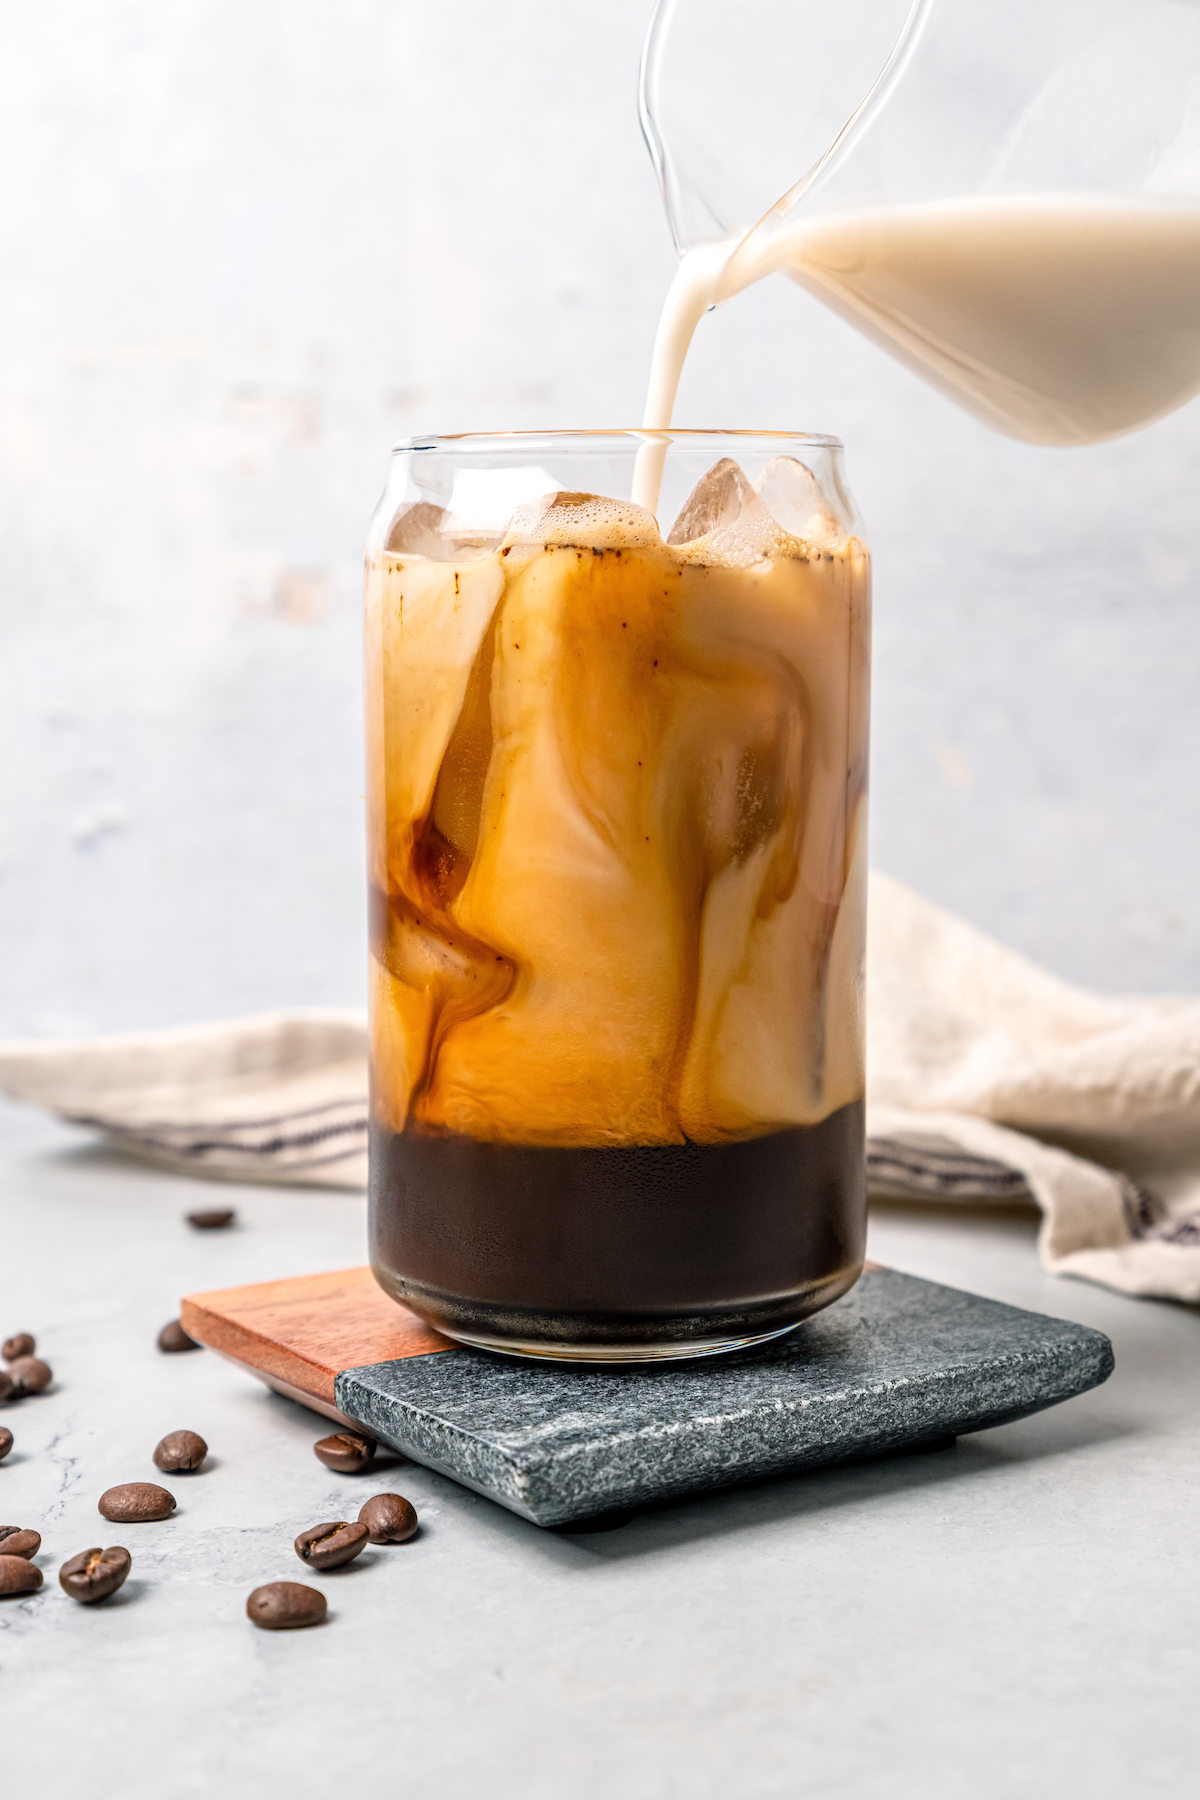 Adding milk to a glass of iced coffee.